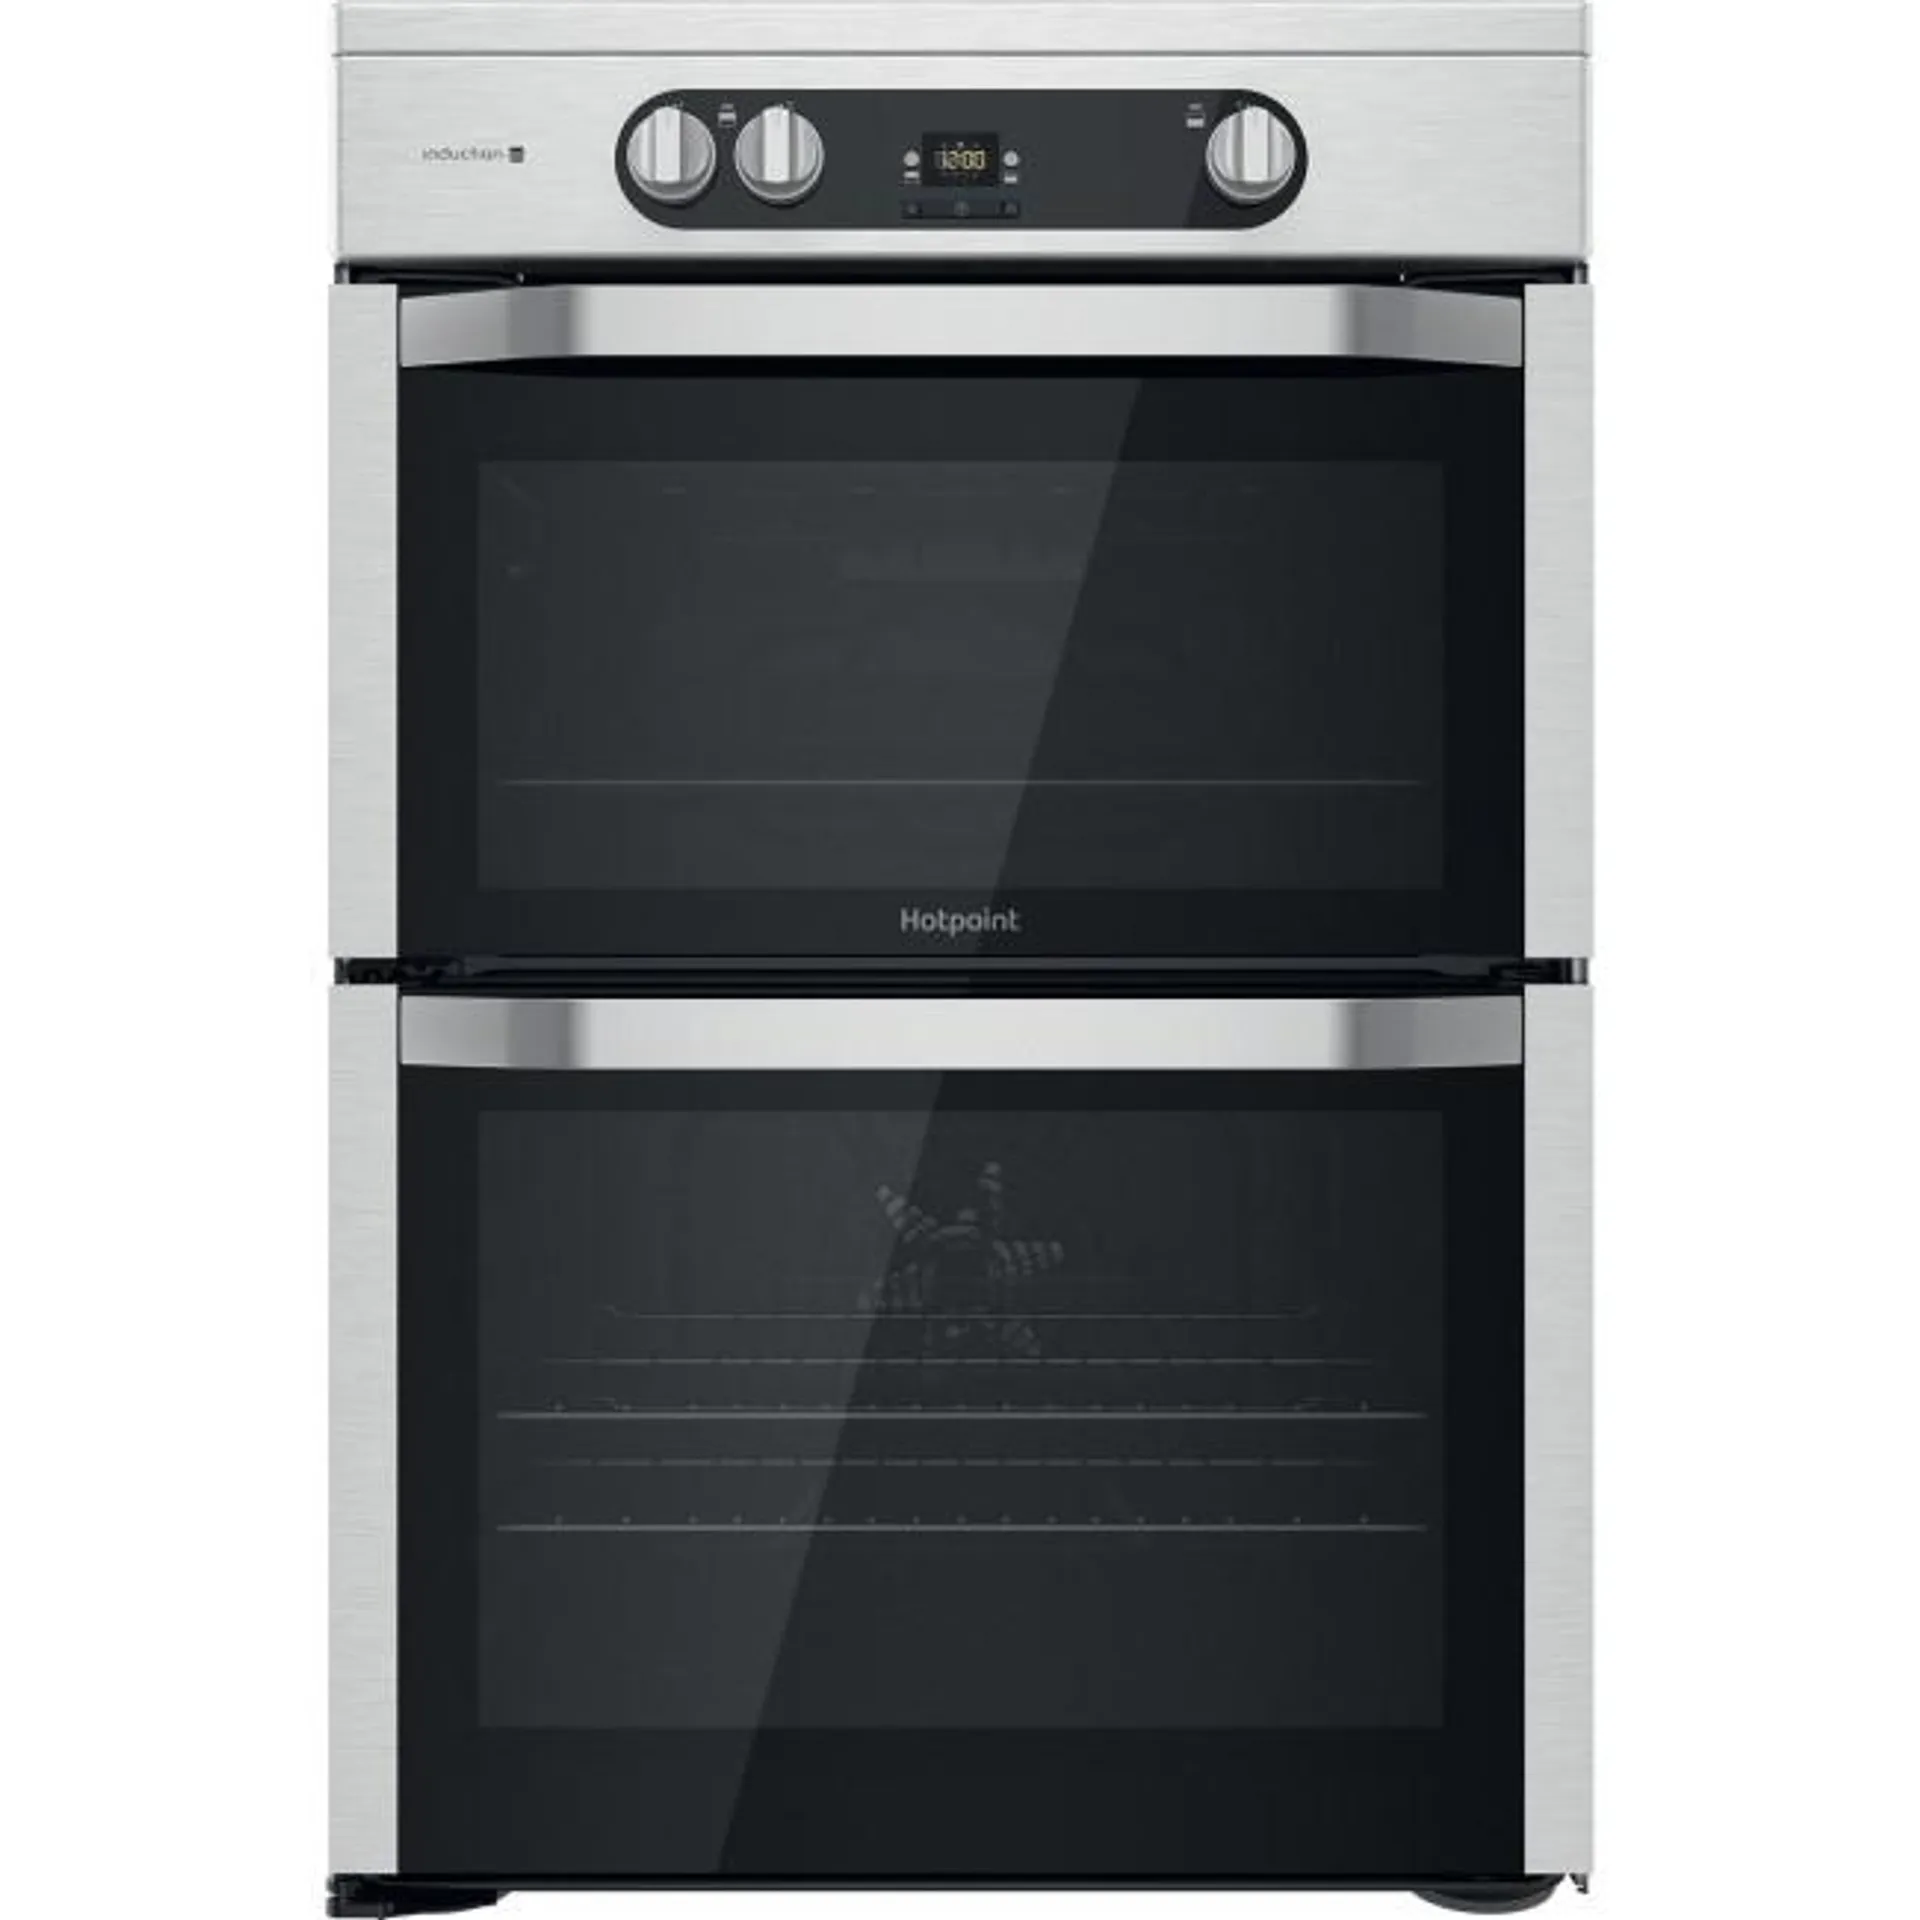 Hotpoint 60cm Double Oven Induction Electric Cooker - Stainless Steel